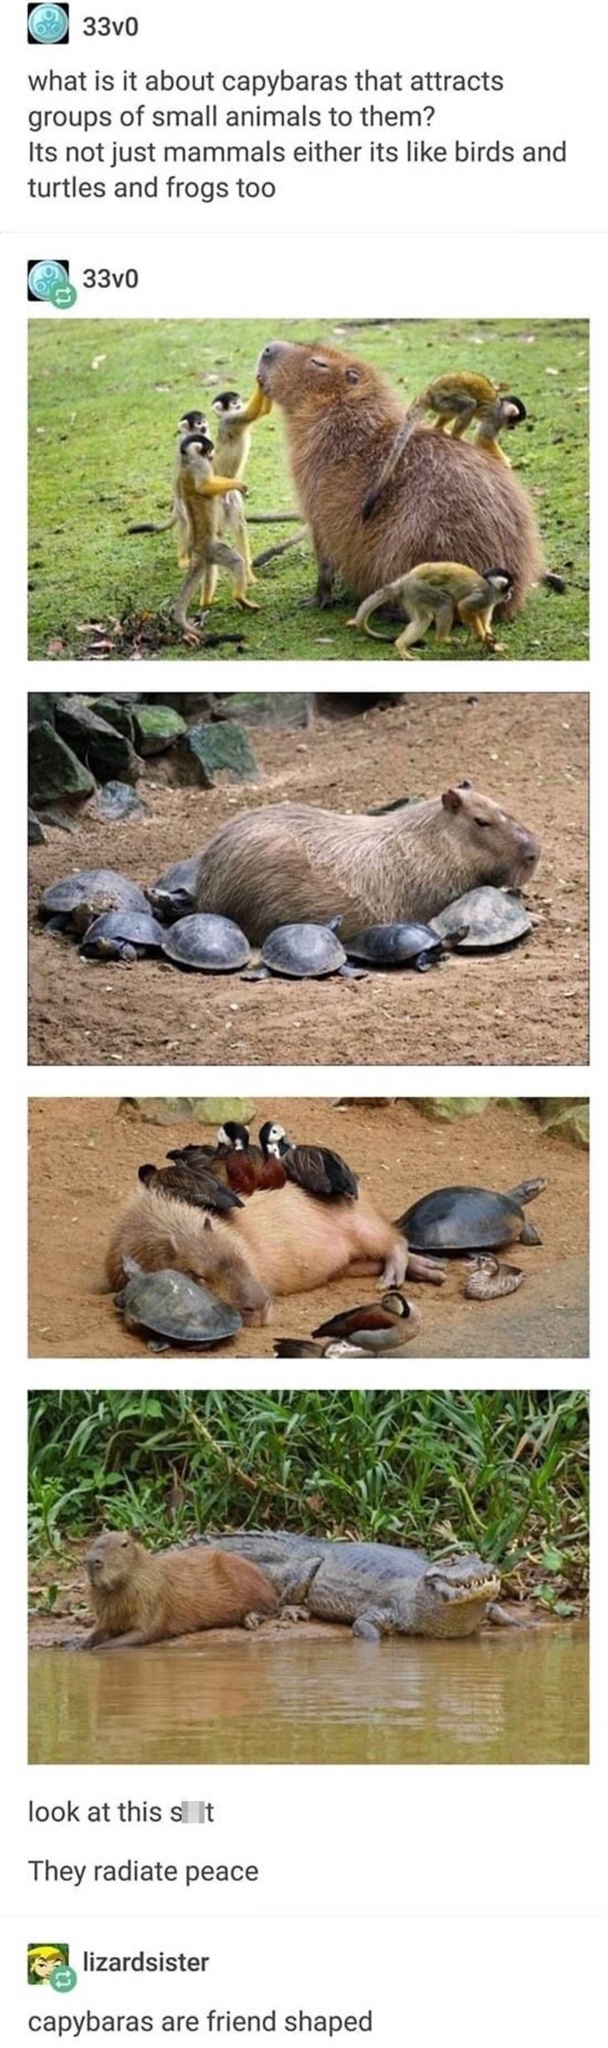 random pics - capybara meme - 11 what is about capybarithe acts groups of small as to them? Its not just a mais eftherits birds and lures and frogato 100 look at this They radiane peace capybos we friend shaped